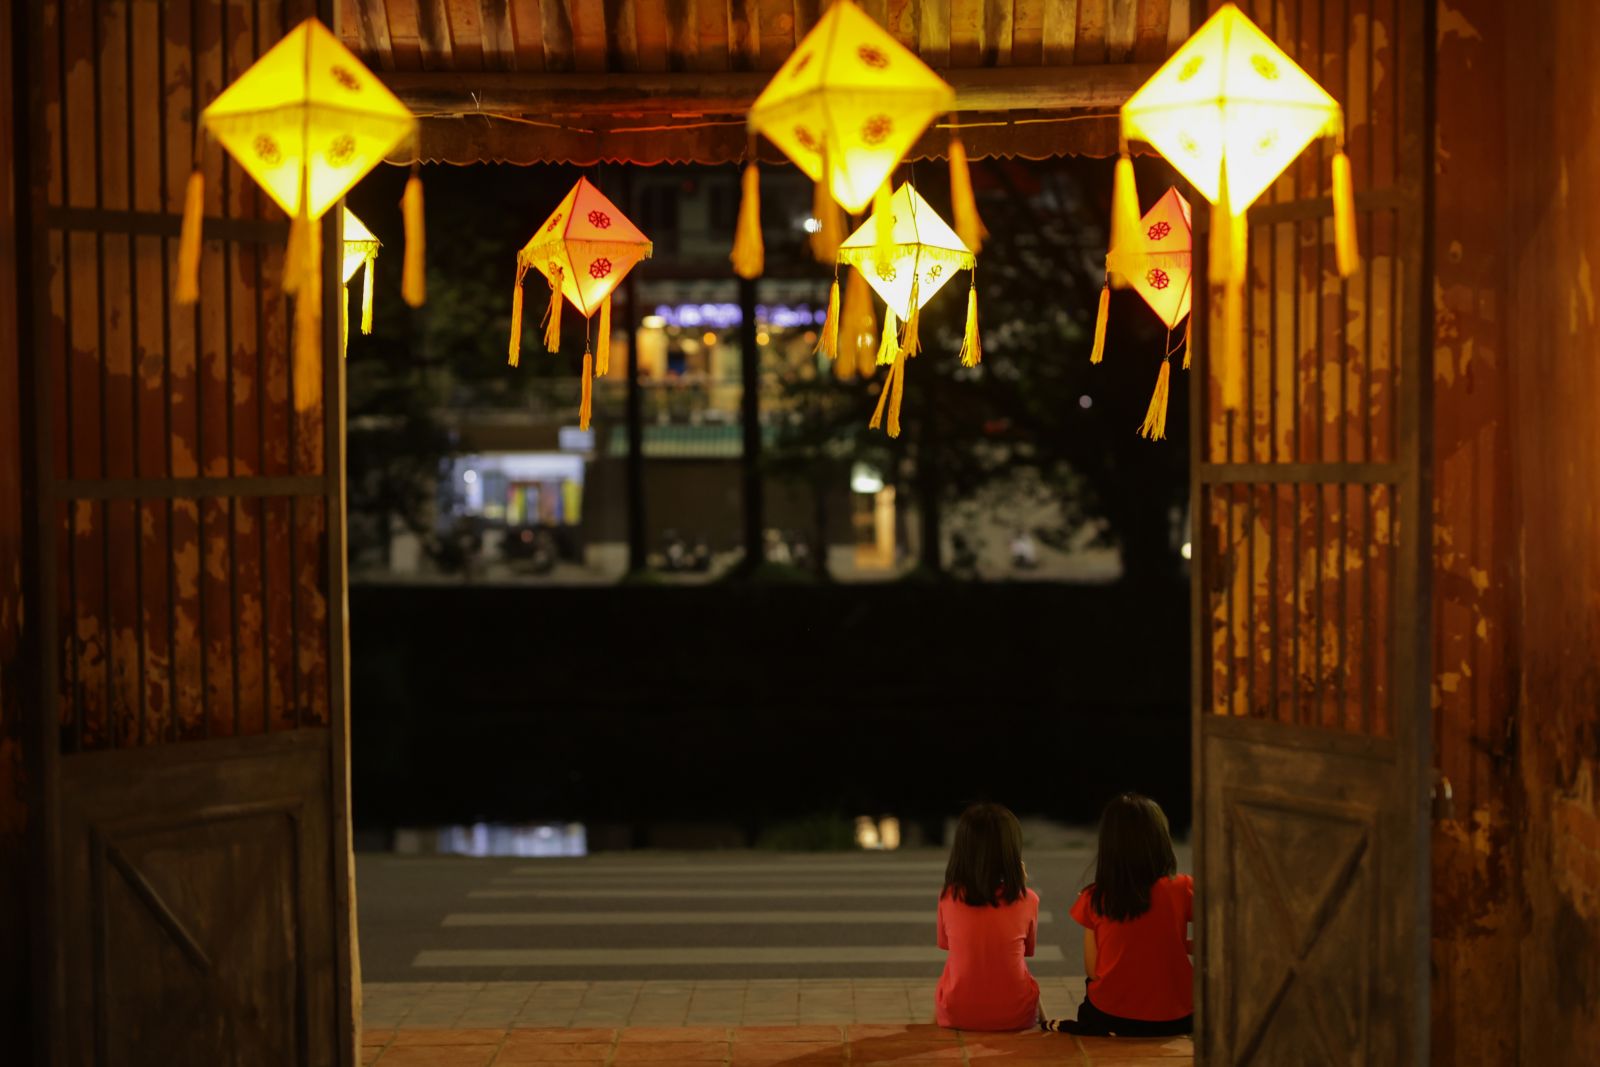 Two little girls with their families enjoying the atmosphere of the approaching Vesak